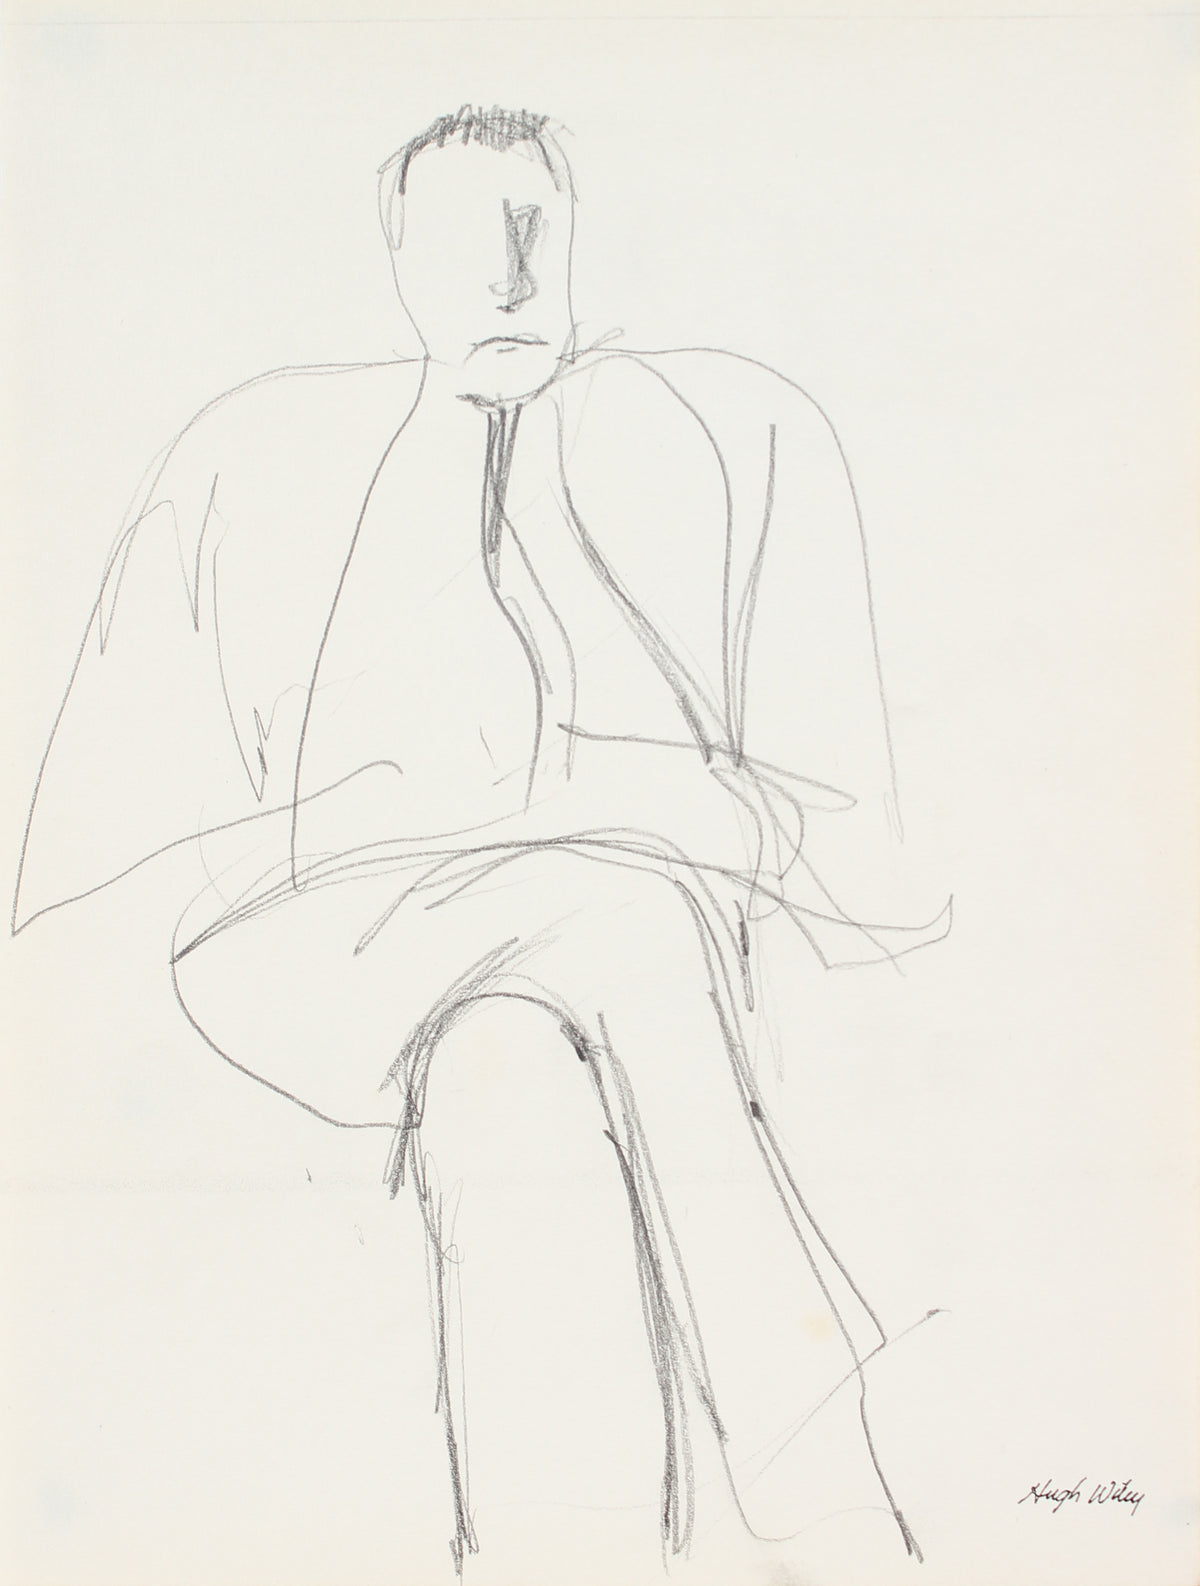 Seated Male - Sketch &lt;br&gt;Late 1950s Graphite&lt;br&gt;&lt;br&gt;#A4266